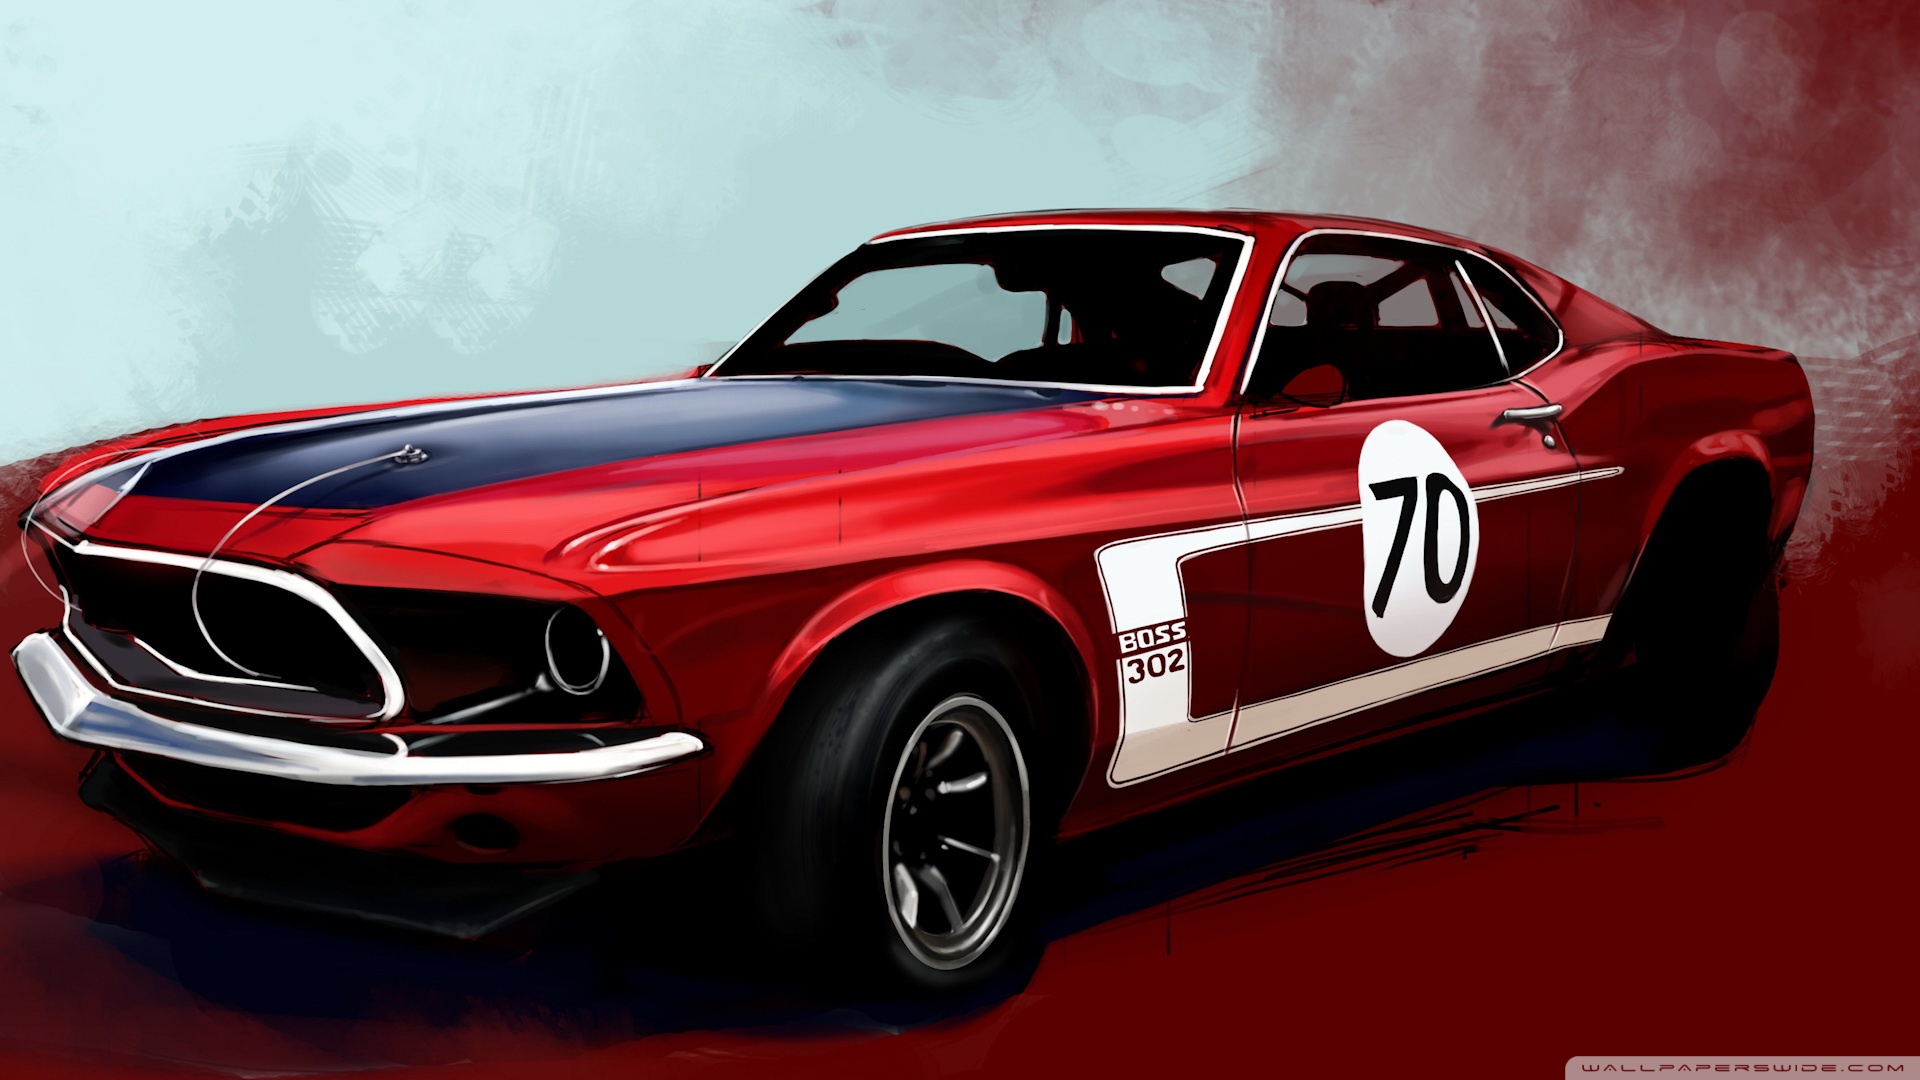 ford mustang boss 302 classic Car wallpaper 1920x1080 Albums Category Tech Tips